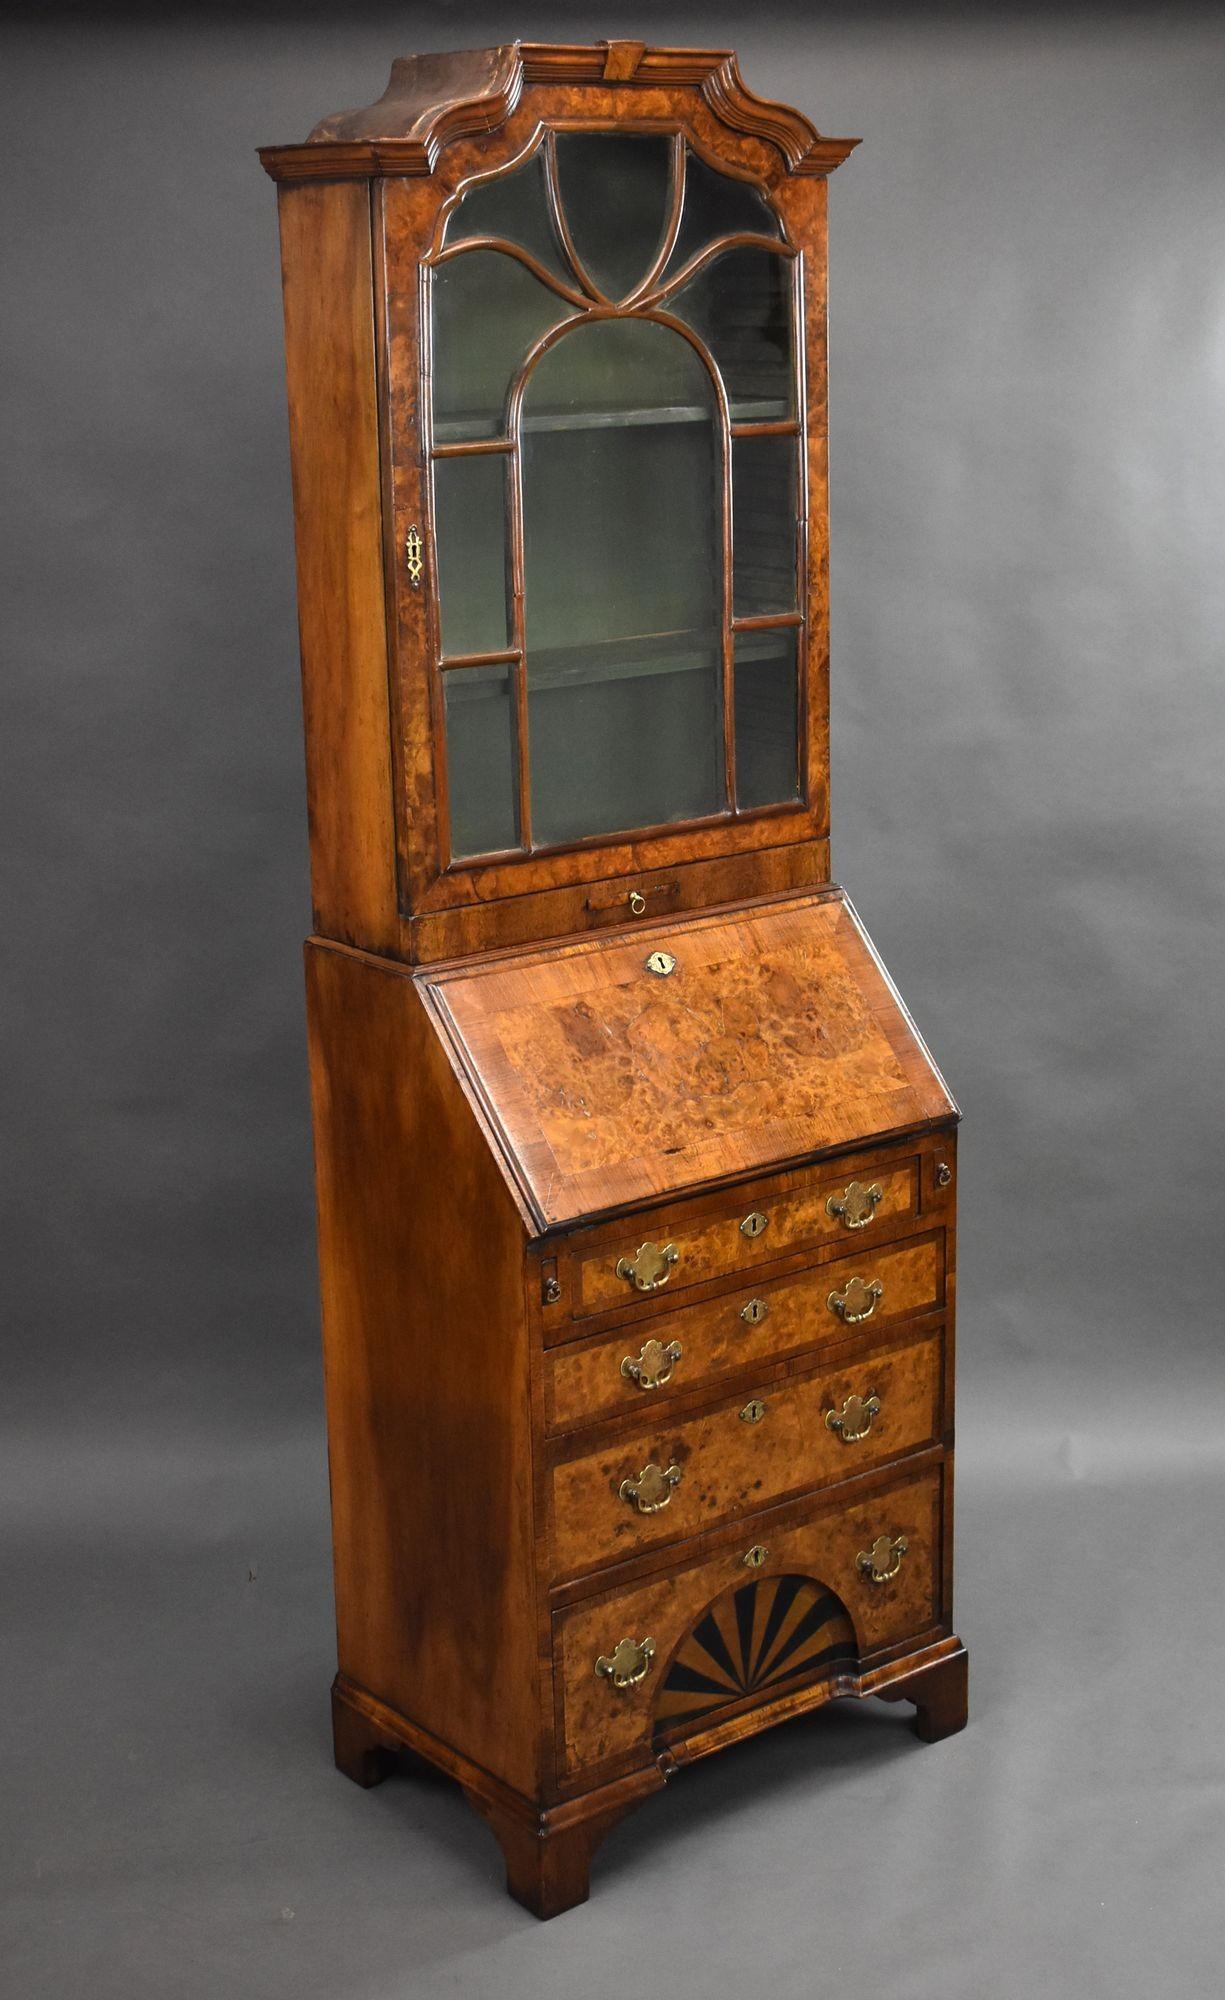 For sale is a good quality antique Queen Anne style burr walnut bureau bookcase, having a glazed top with adjustable shelves, above a bureau base, with the fall opening to a fully fitted interior over four graduated drawers. The bookcase stands on